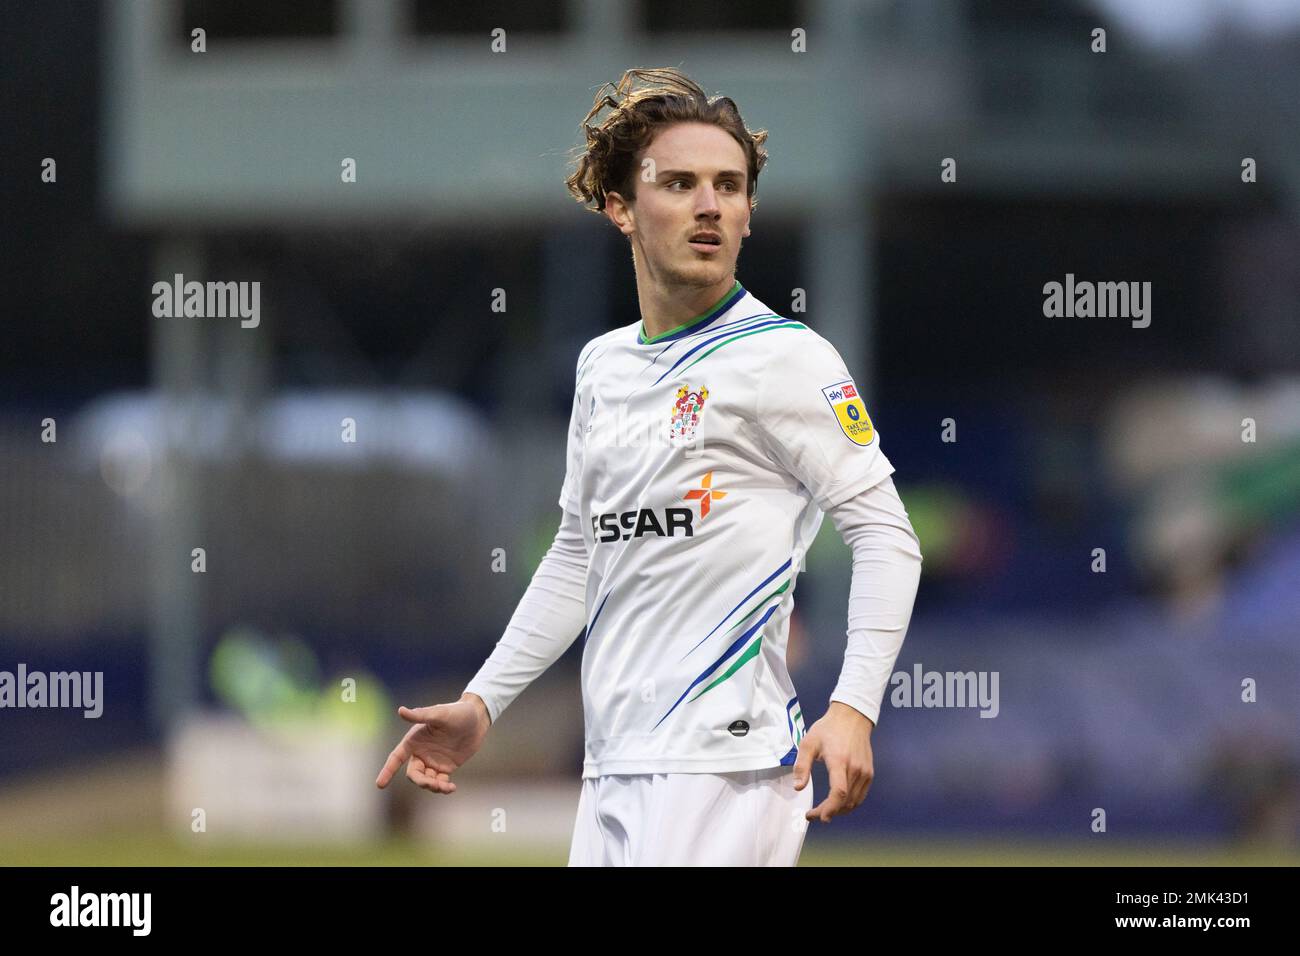 Logan Chalmers #19 of Tranmere Rovers during the Sky Bet League 2 match Tranmere Rovers vs Leyton Orient at Prenton Park, Birkenhead, United Kingdom, 28th January 2023  (Photo by Phil Bryan/Alamy Live News) Stock Photo